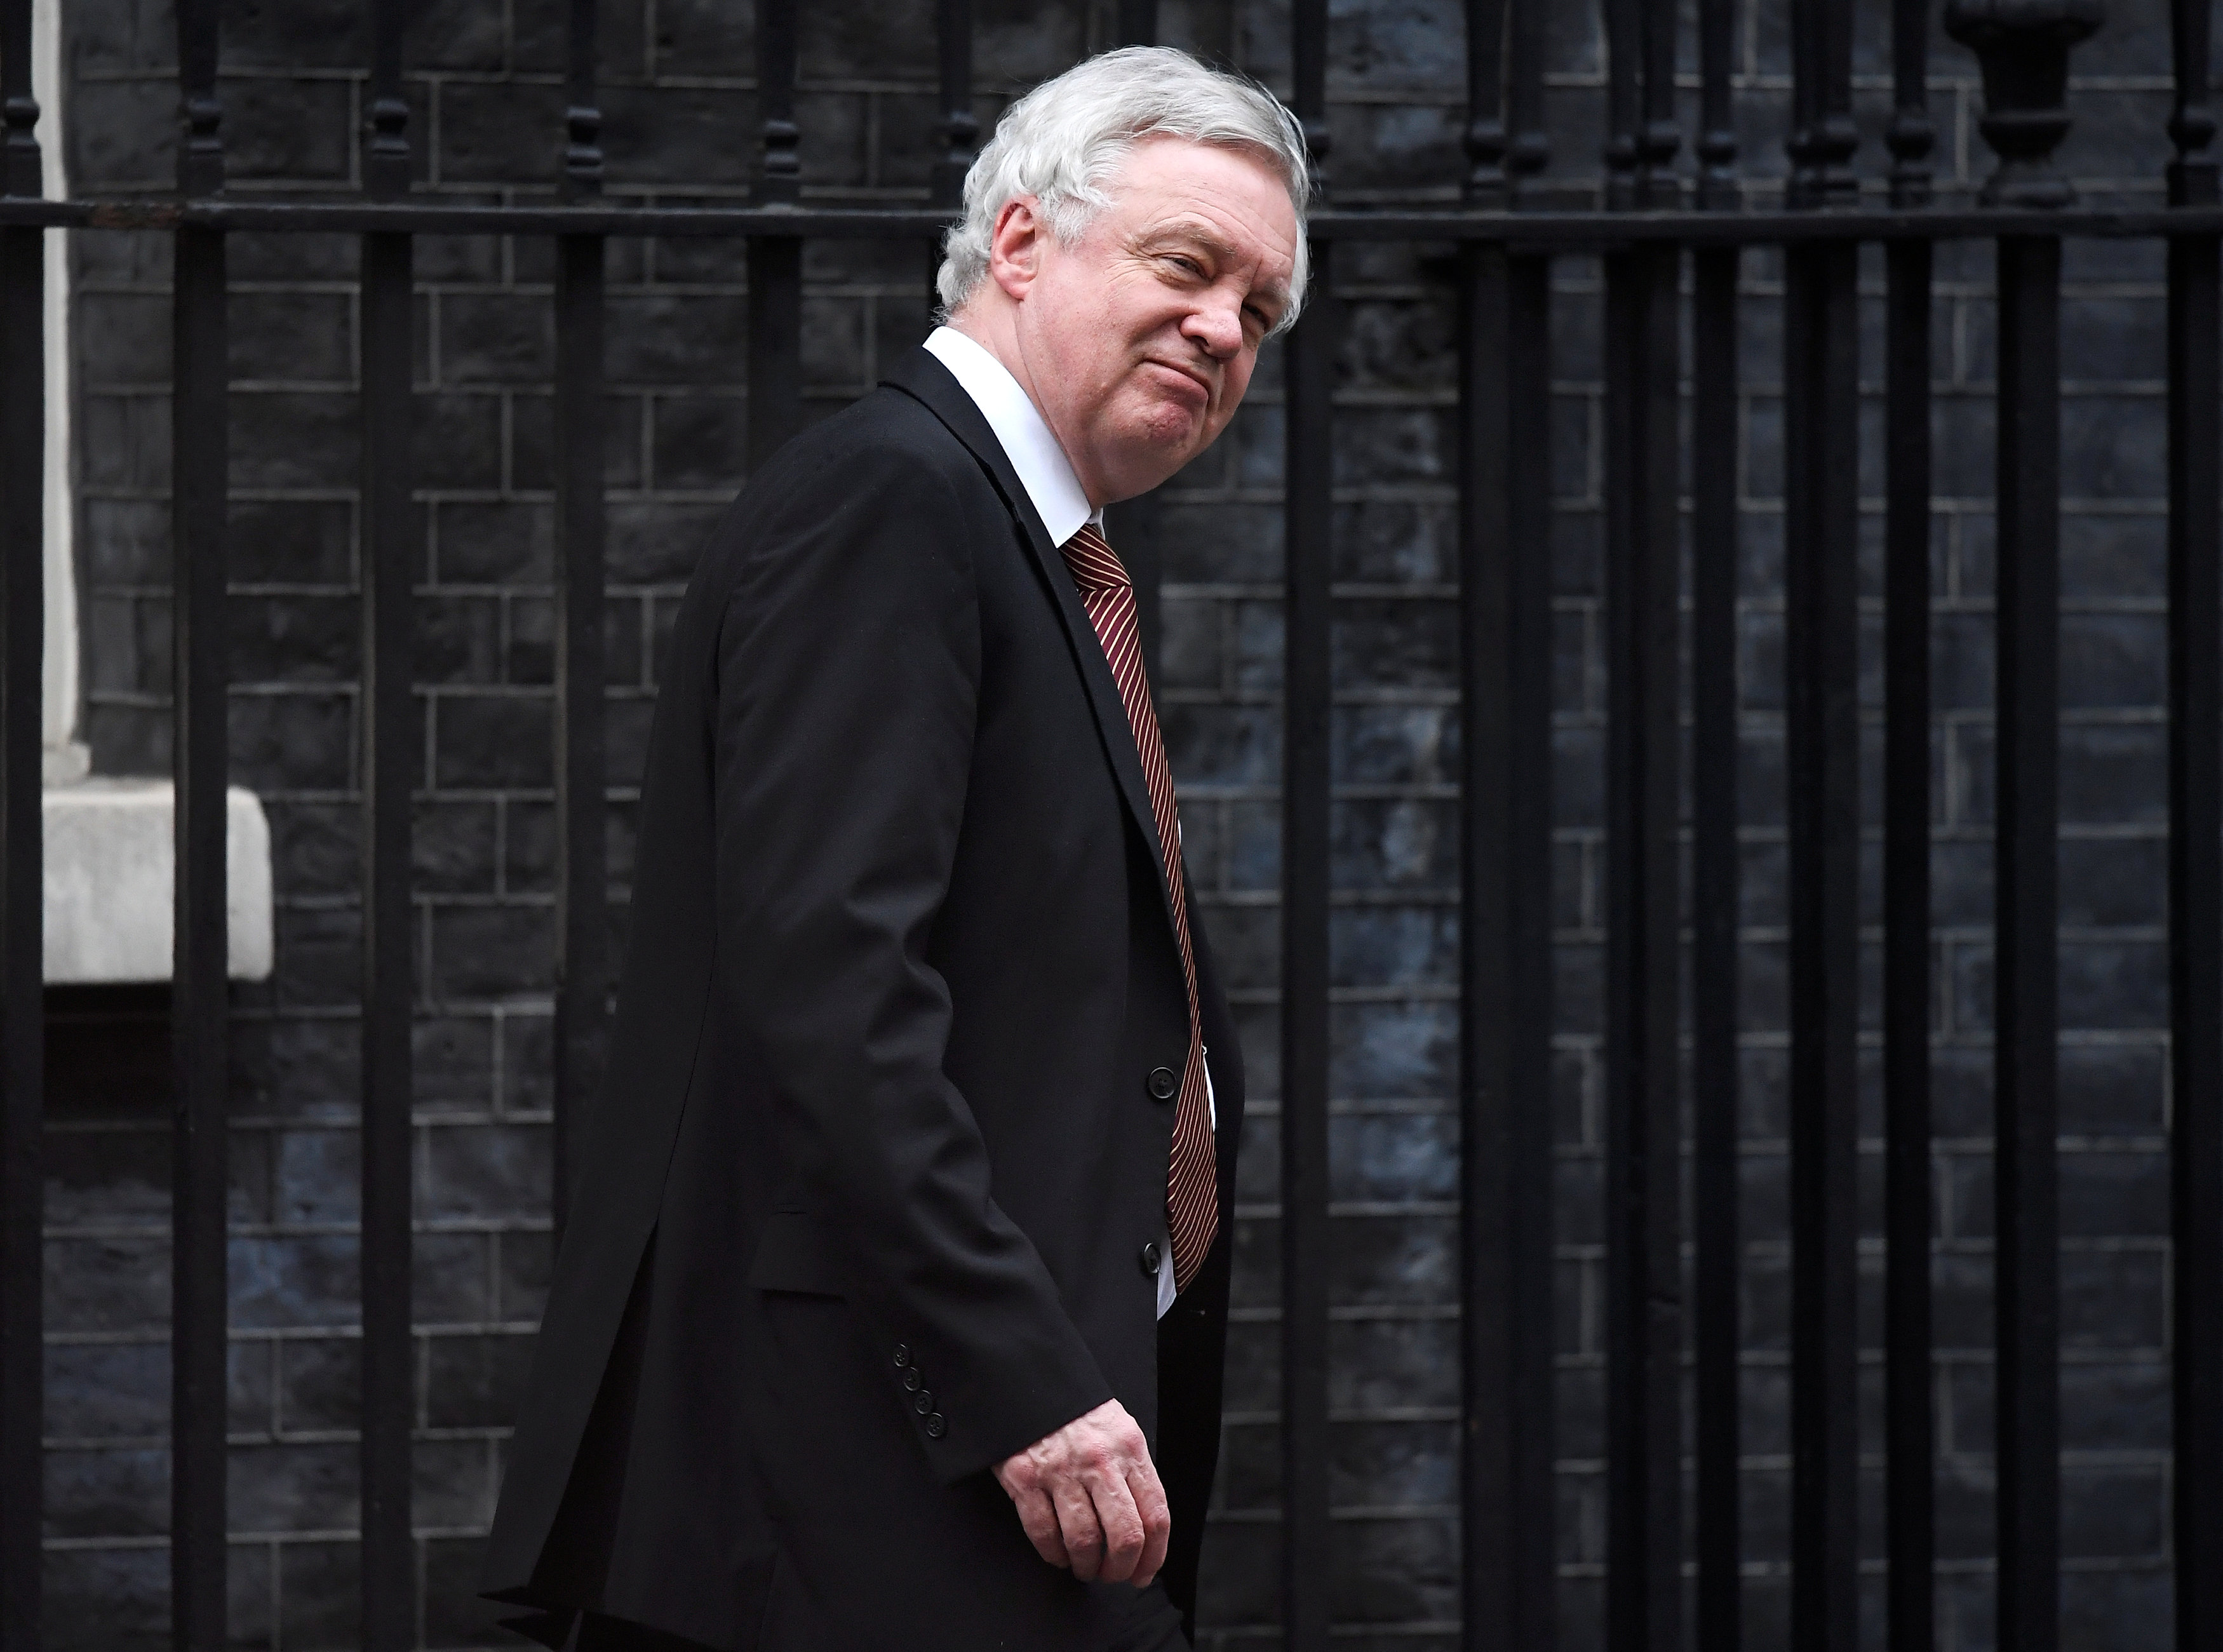 Britain is not a vassal state, says Brexit minister Davis